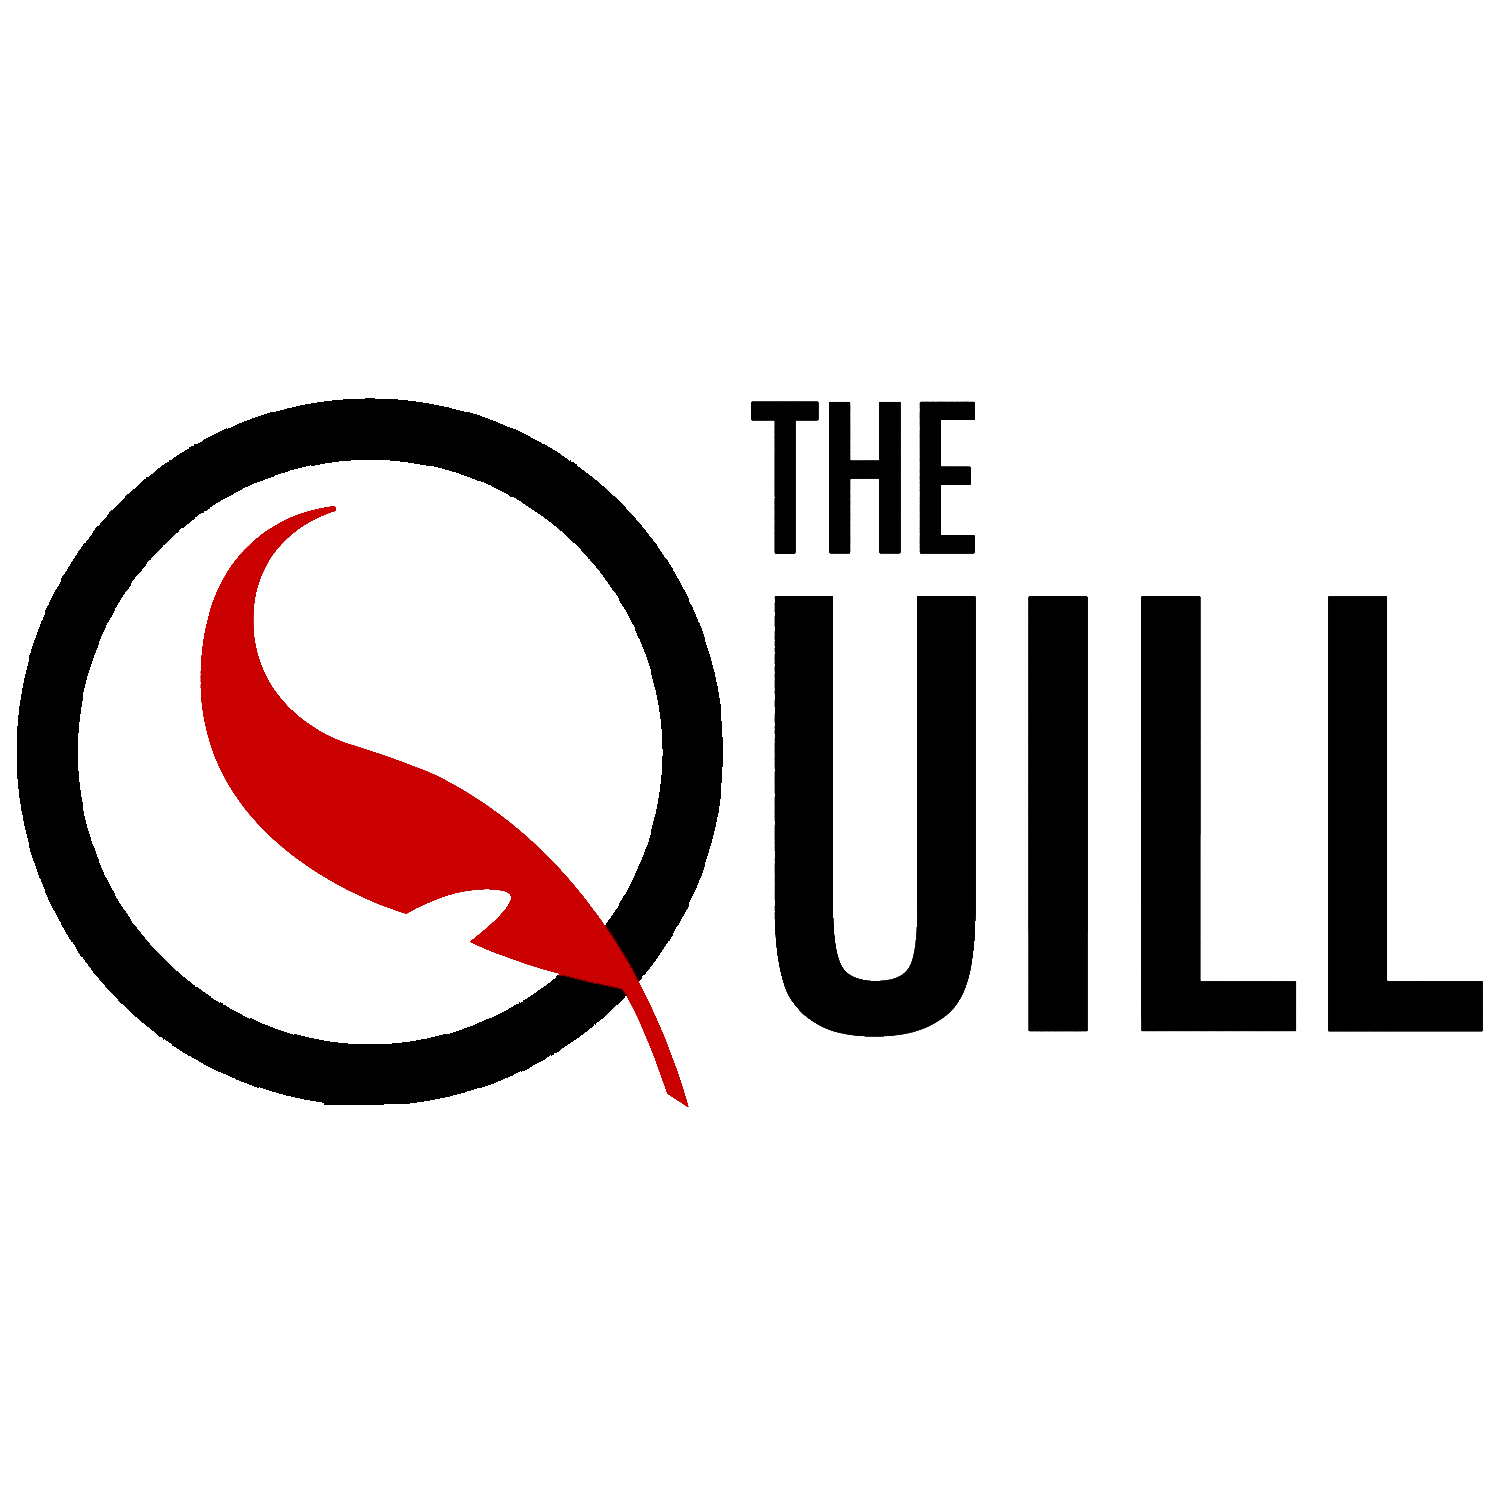 The Quill Affair